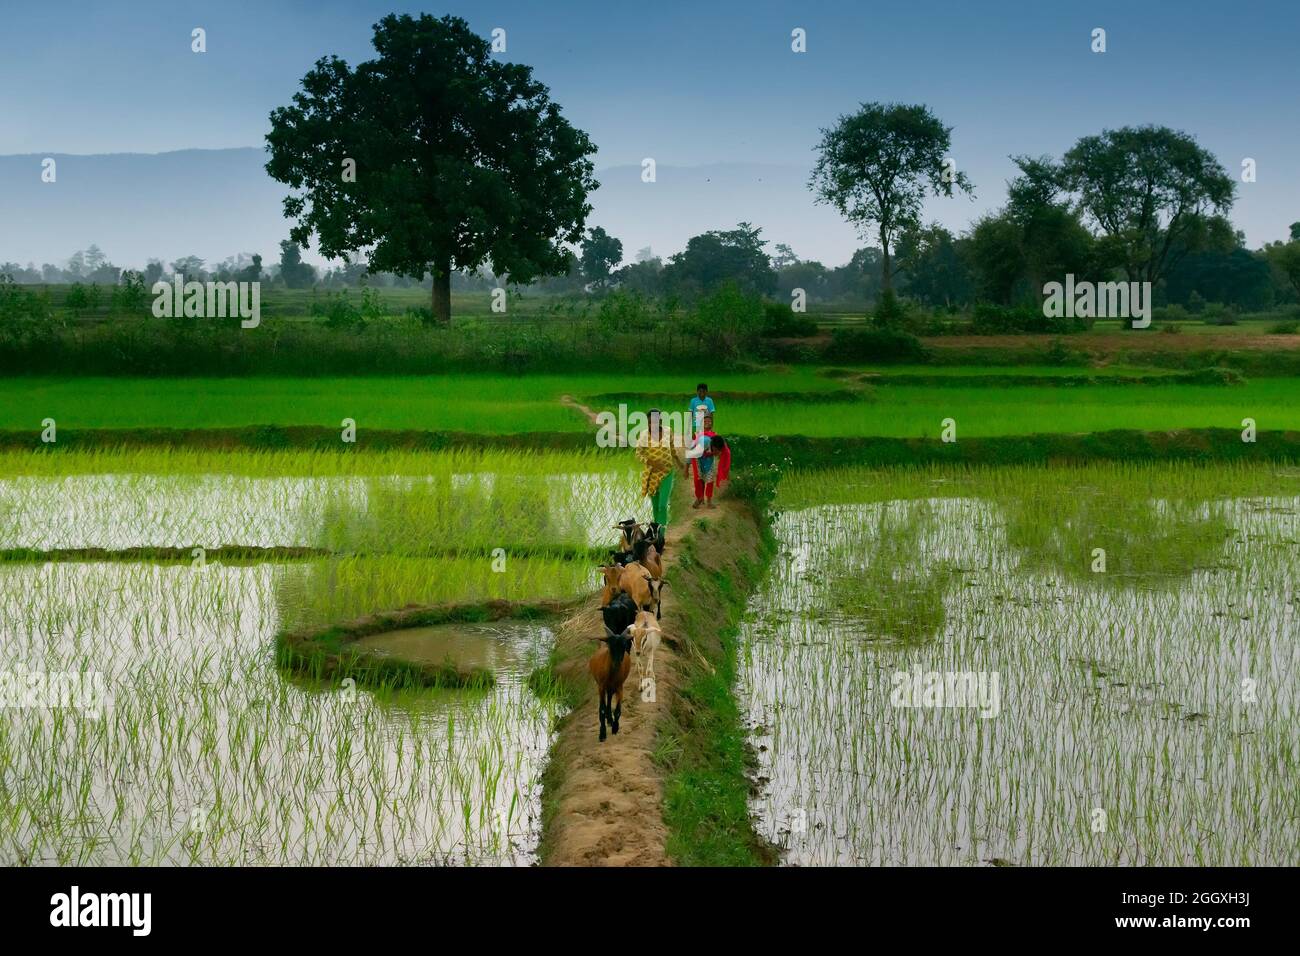 Purulia, West Bengal, Indian - August 13th 2017 : Rural children returning home with their goats after feeding them in the field, monsoon sky above. Stock Photo